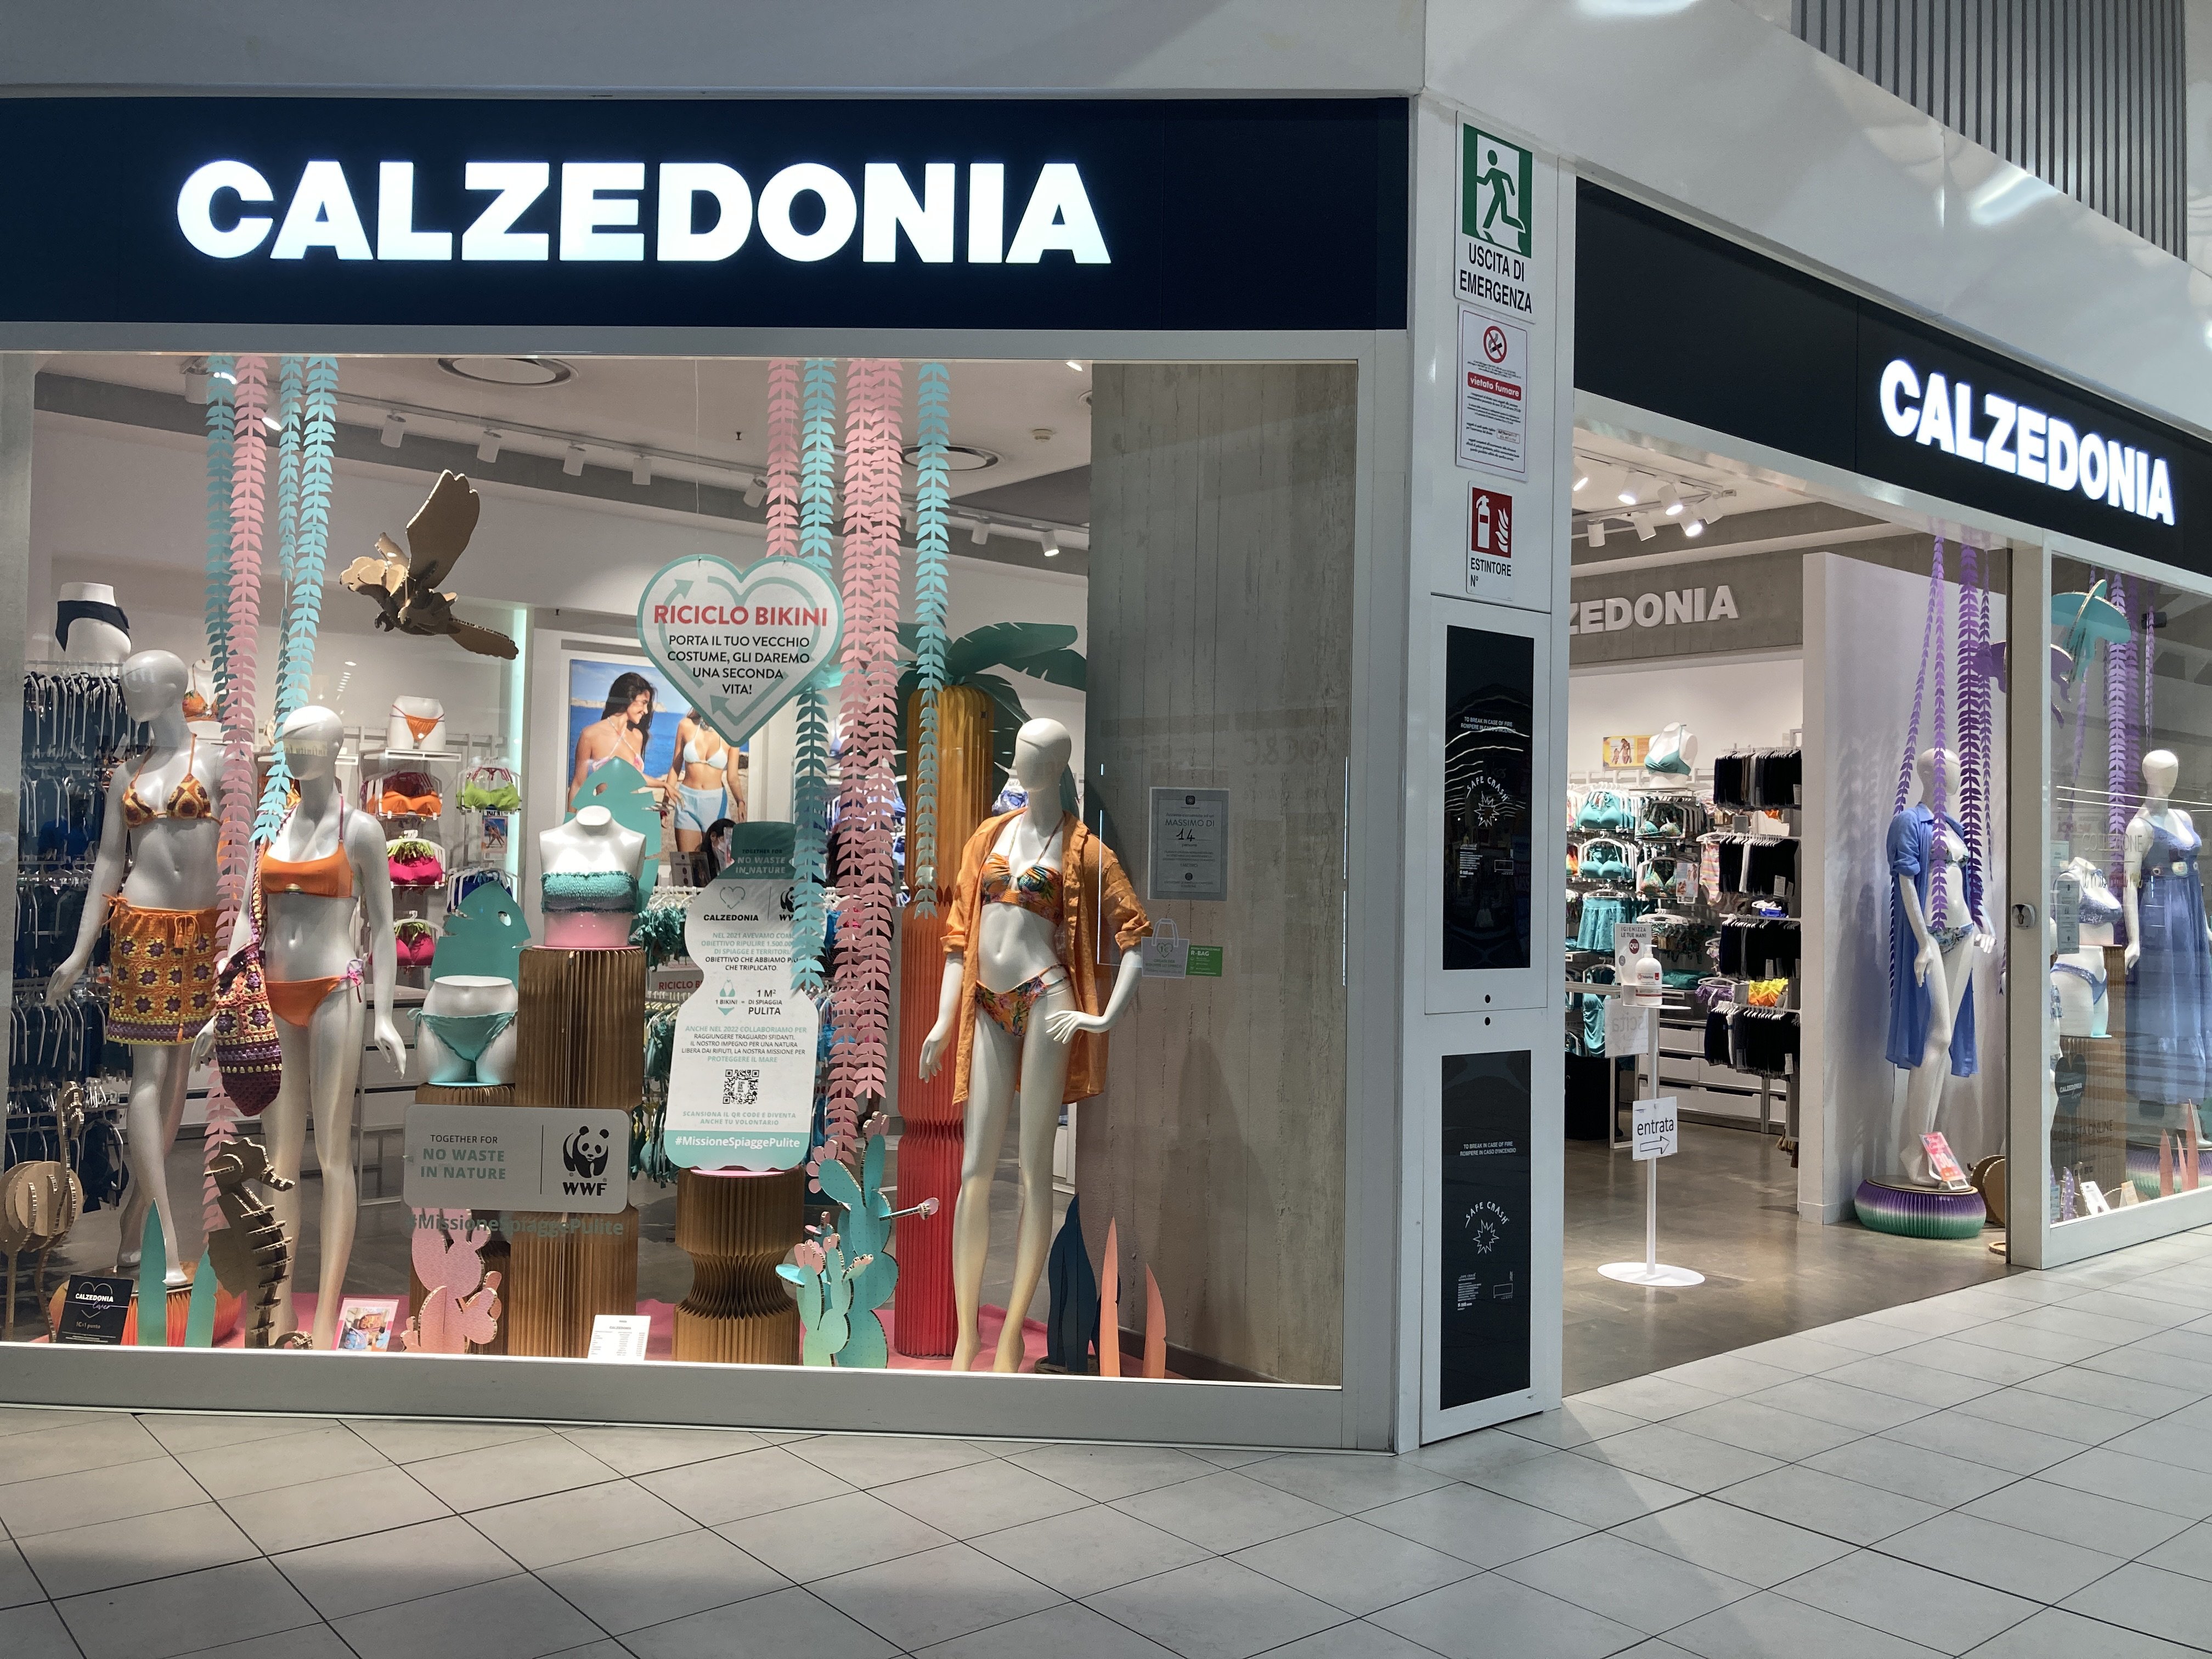 https://www.calzedonia.com/on/demandware.static/-/Library-Sites-CalzedoniaContentLibrary/default/dw95f9316e/storeImages/CLZ_CCF7_001.jpg